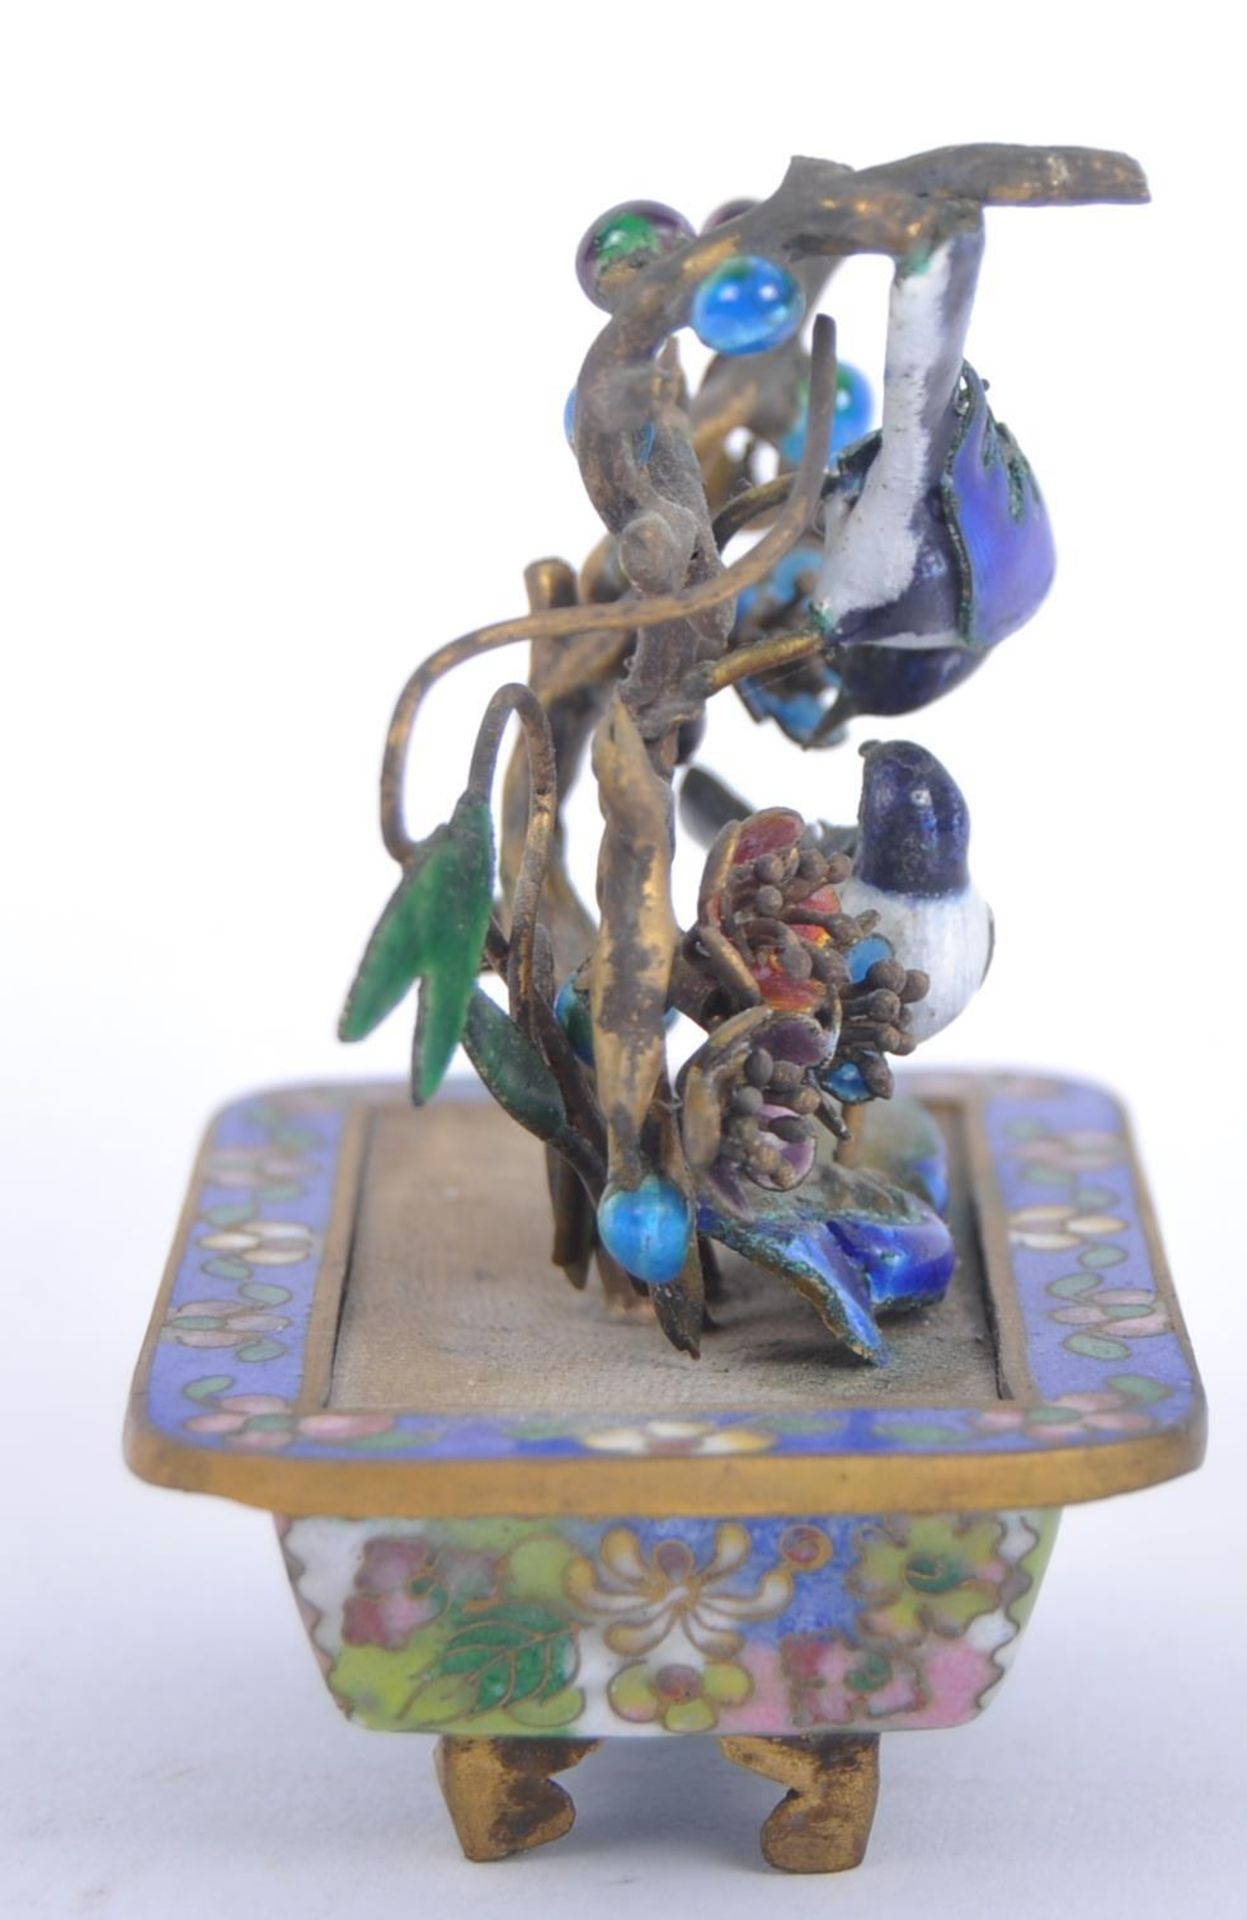 EARLY 20TH CENTURY CHINESE CLOISONNE BONSAI TREE - Image 2 of 5